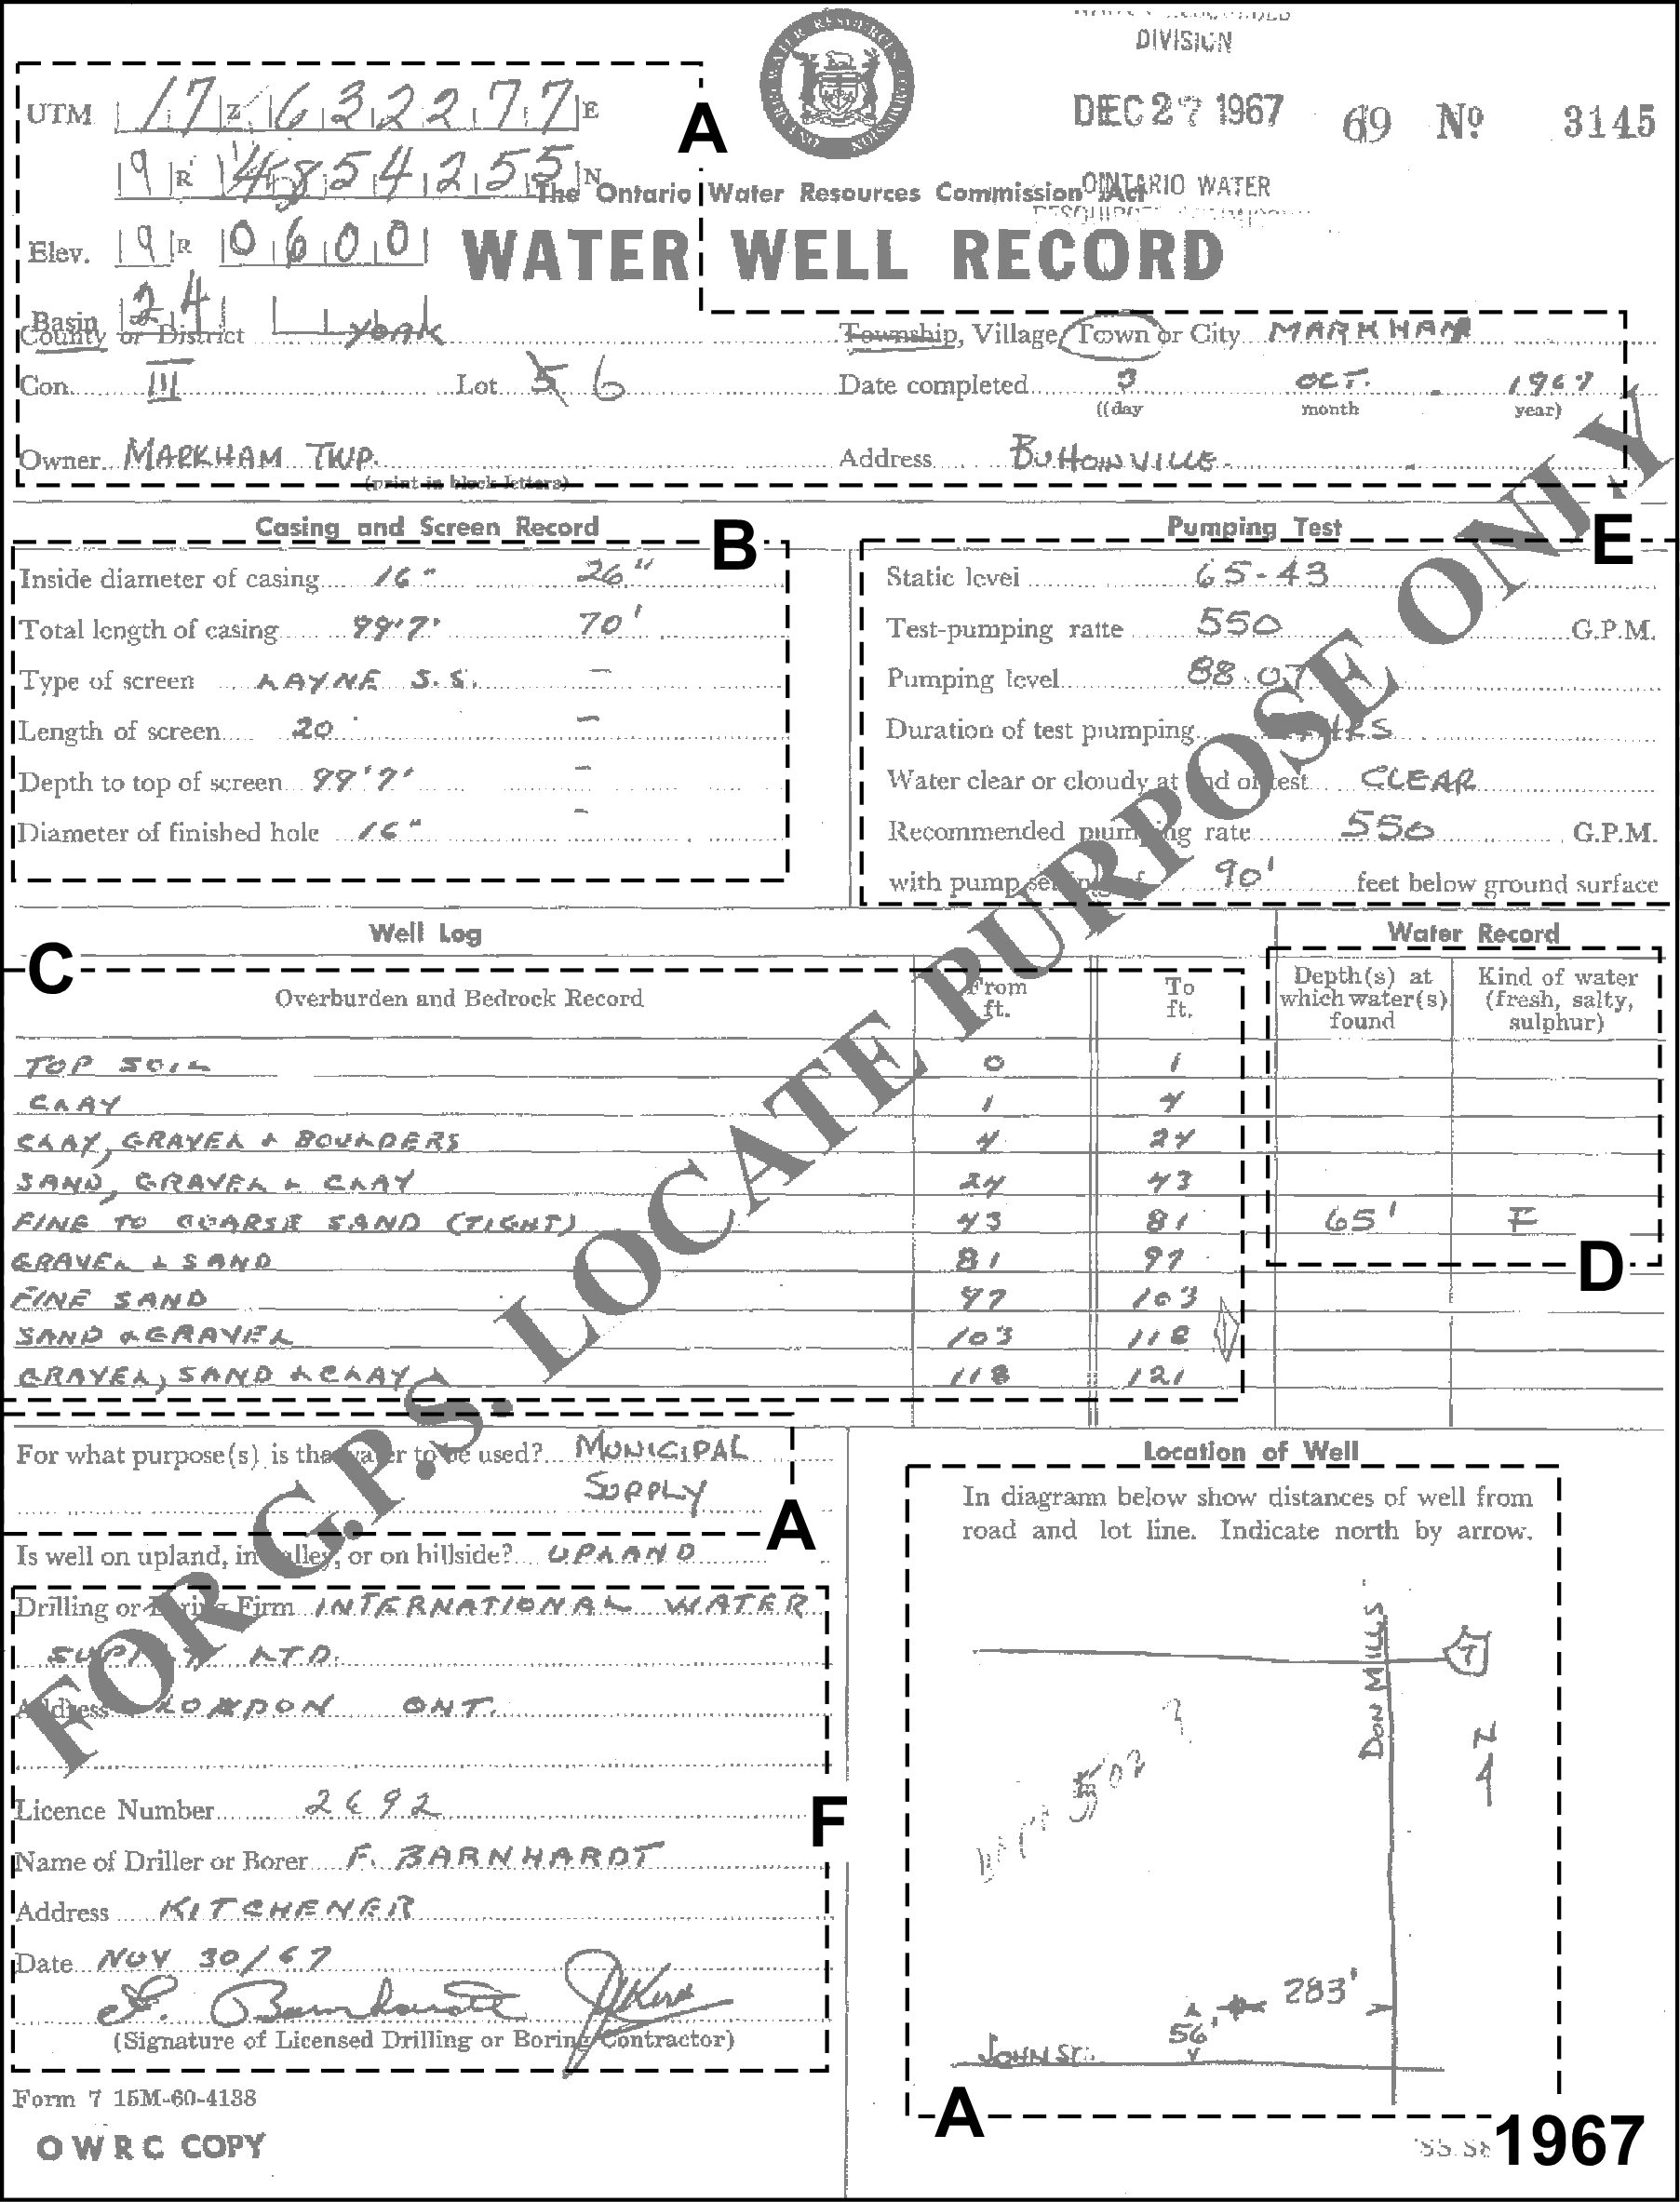 Figure 2.3.1.2 Example MOE Water Well Record - 1967